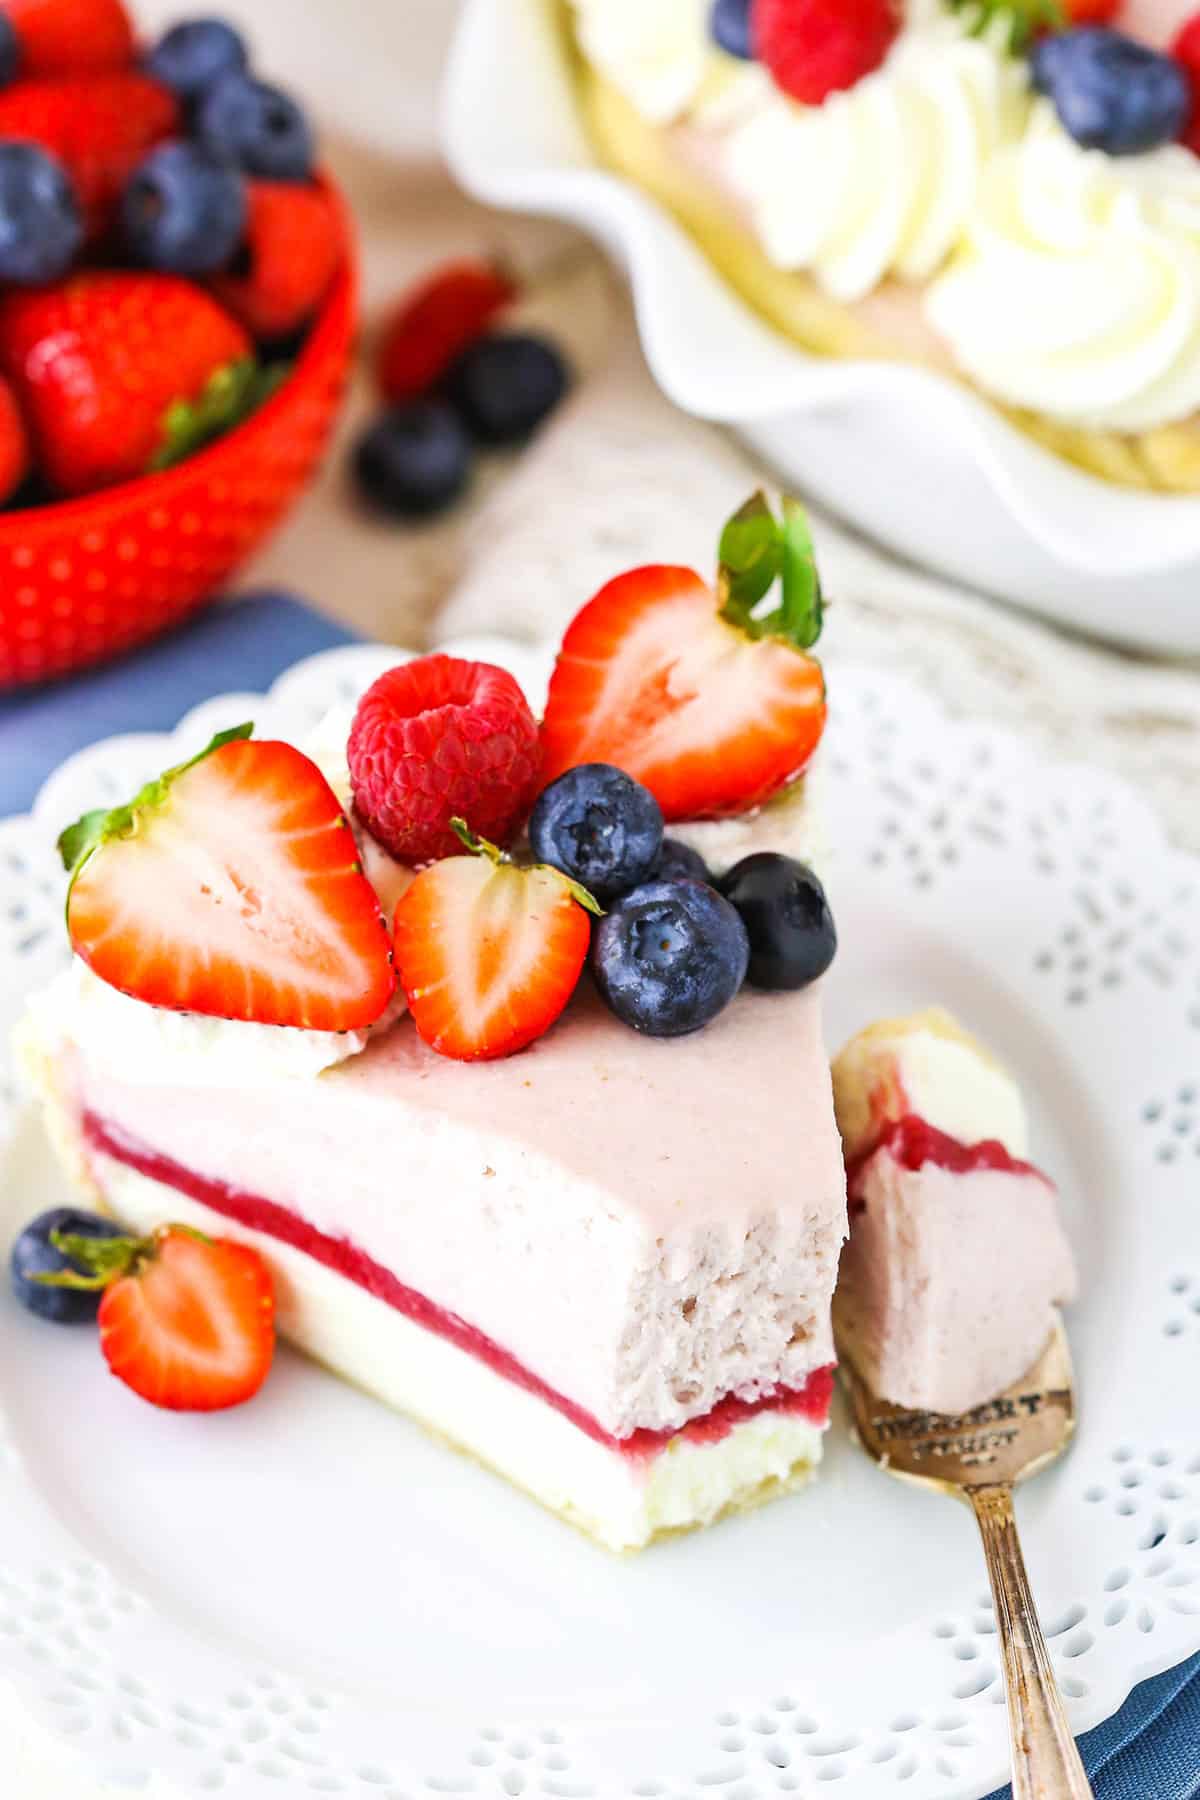 A slice of Berry Almond Cream Pie with a bite taken out next to a fork on a white plate